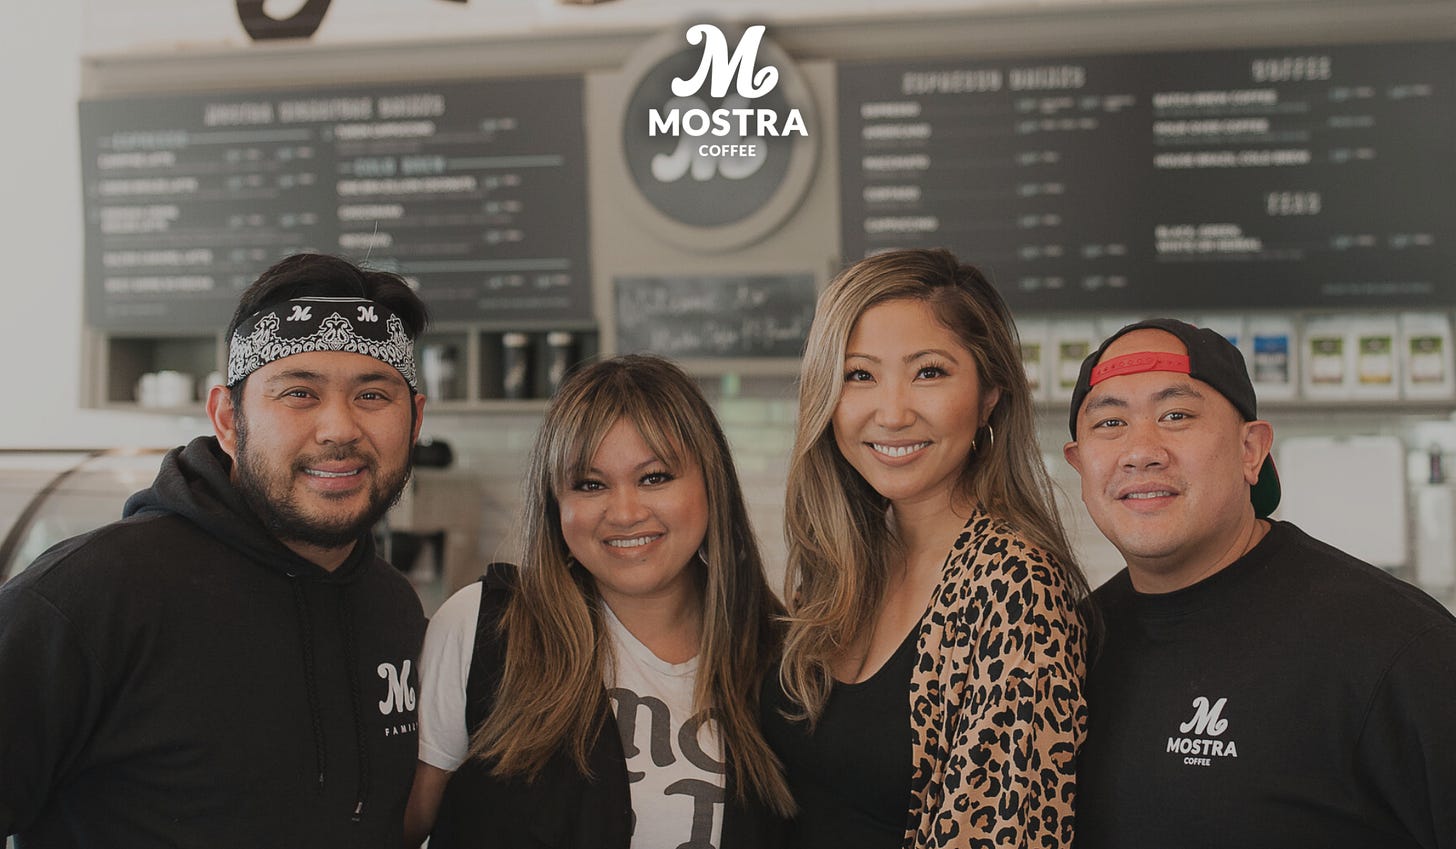 The owners of Mostra Coffee in front of their menu board. From left Sam, Bev, Jelynn and Mike.